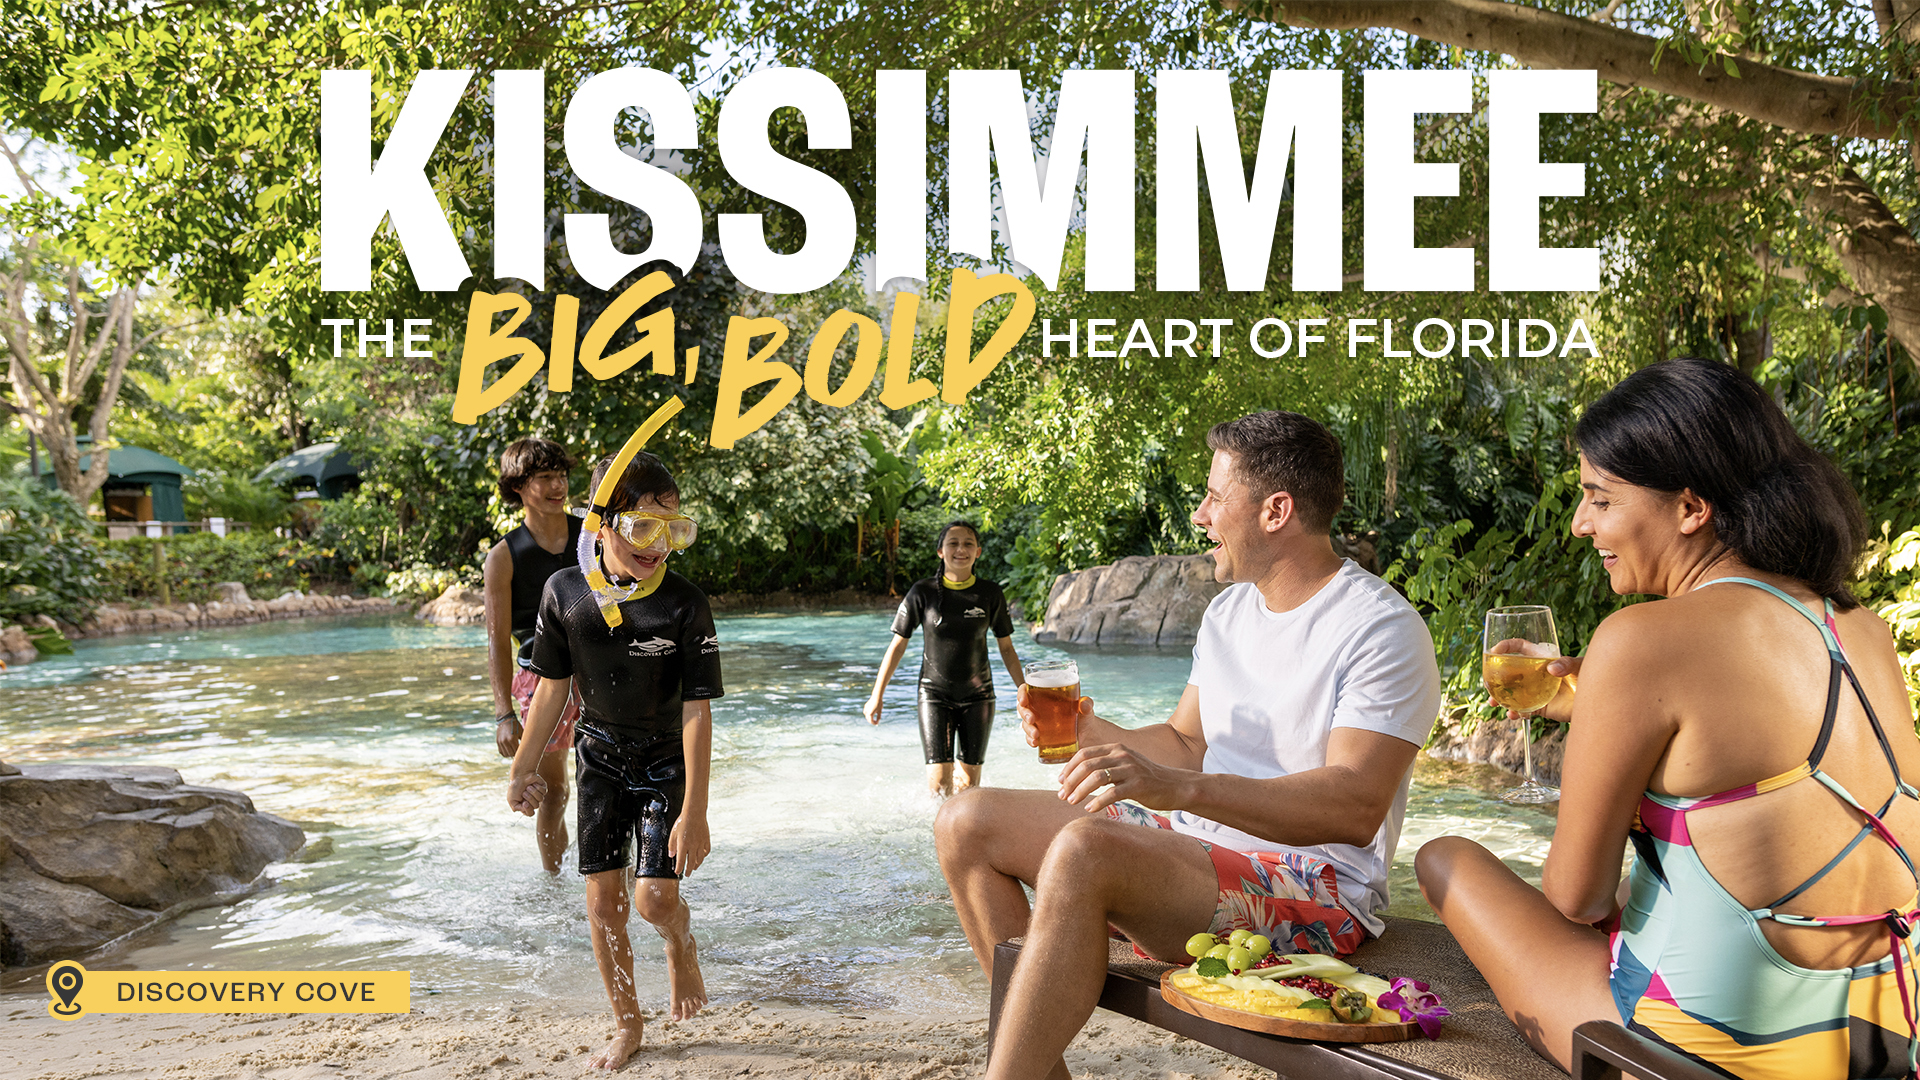 Experience Kissimmee - The Big, Bold Heart Of Florida